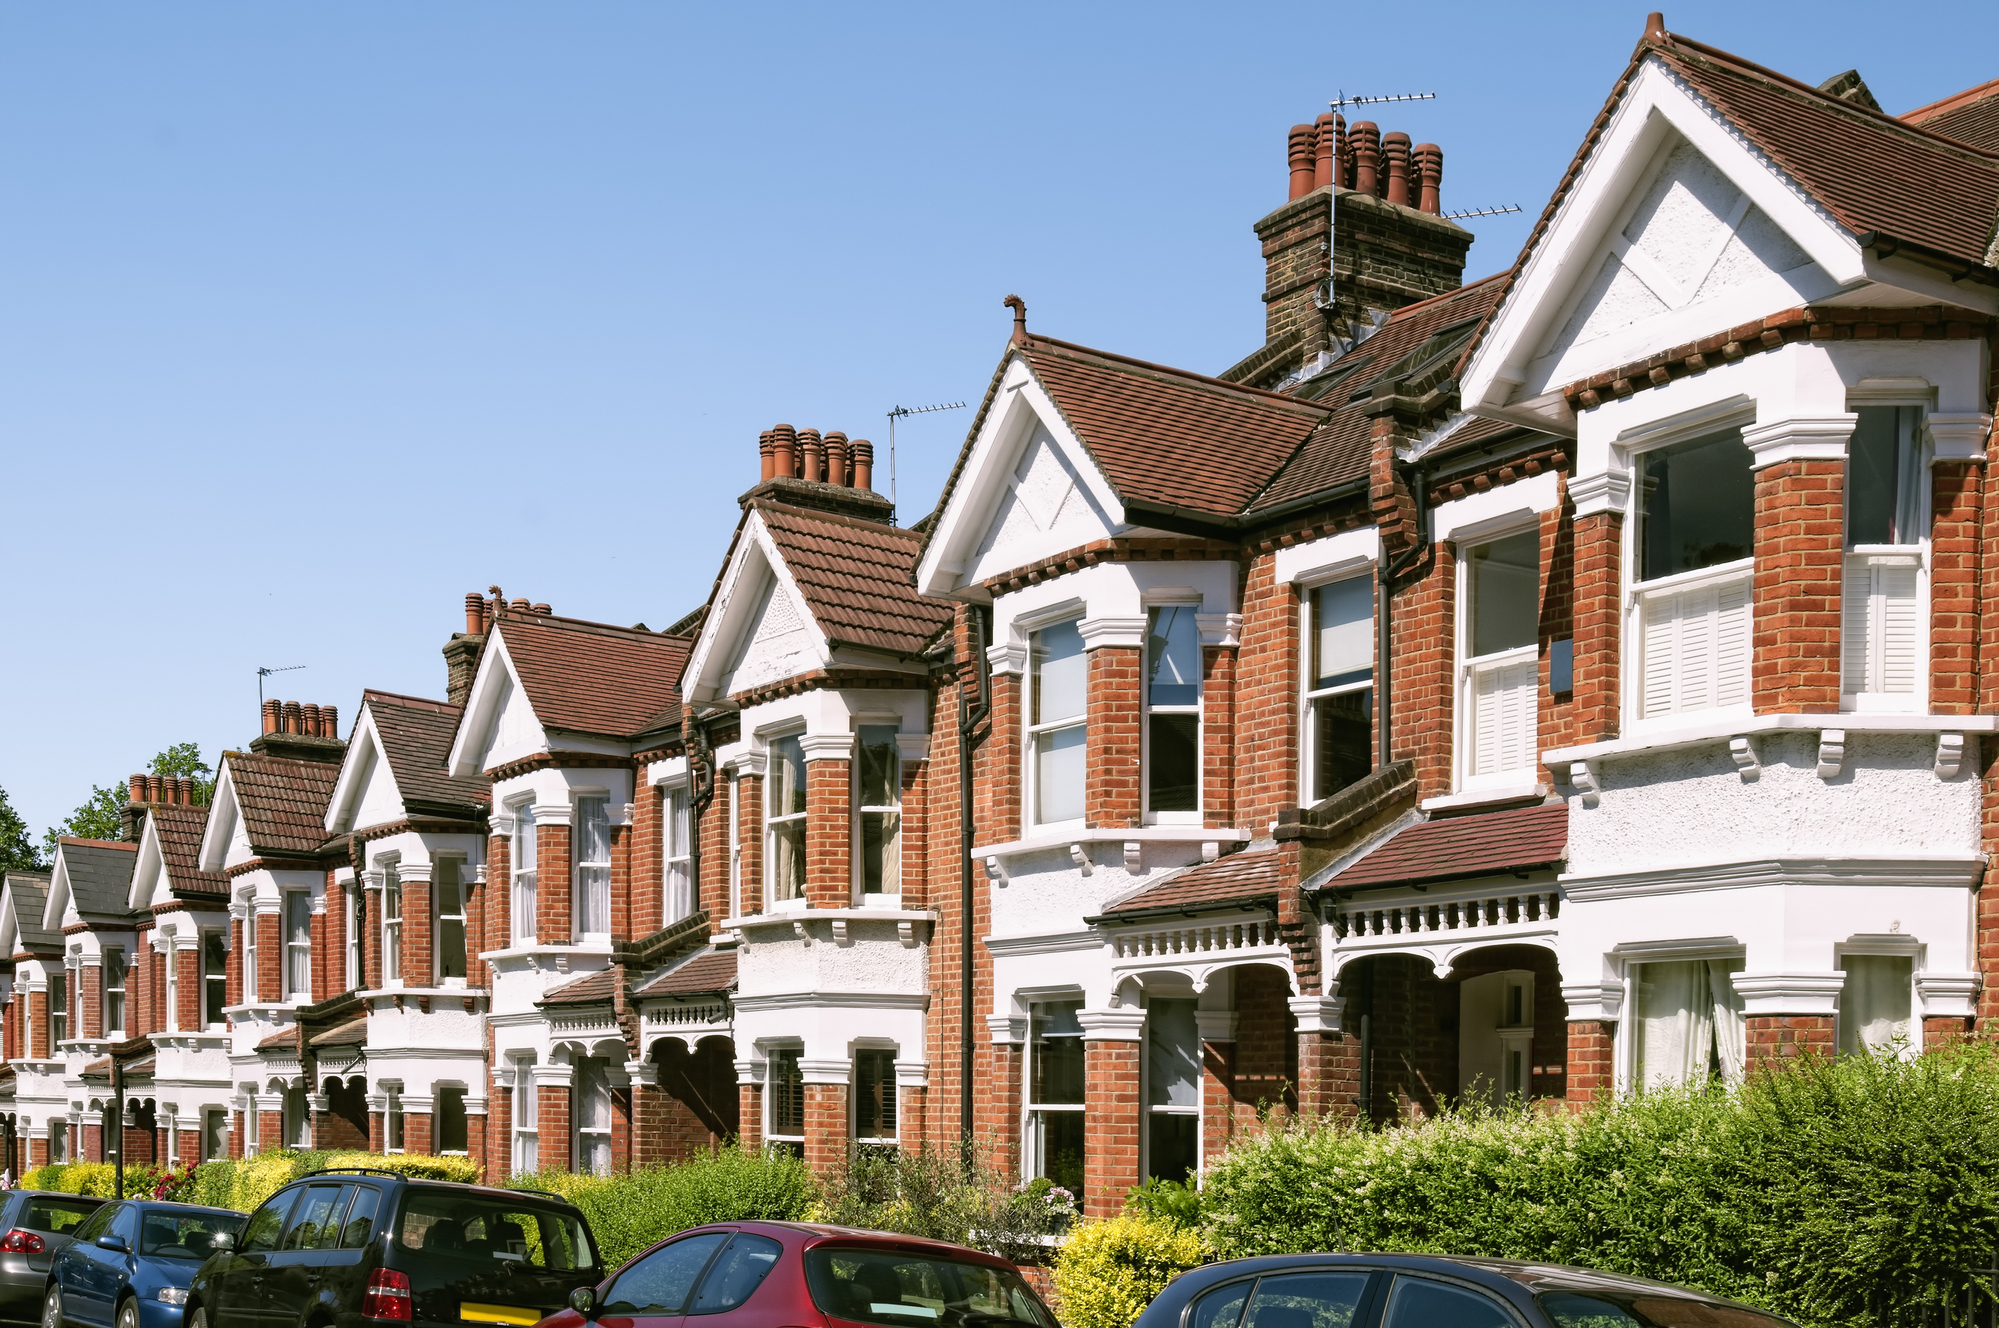 Moving home? Here’s our guide on stamp duty